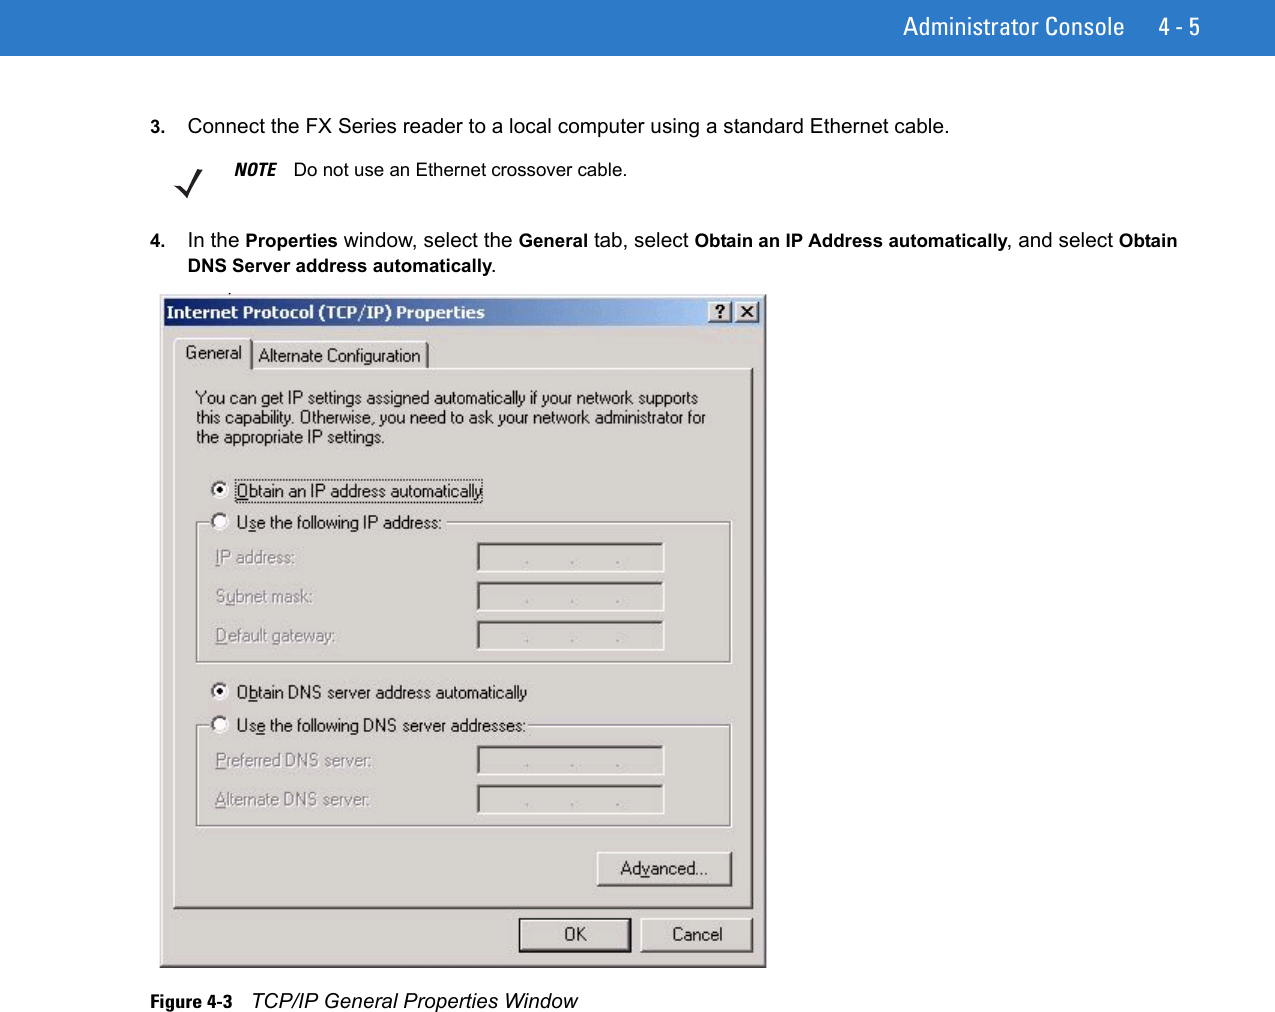 Administrator Console 4 - 53. Connect the FX Series reader to a local computer using a standard Ethernet cable.4. In the Properties window, select the General tab, select Obtain an IP Address automatically, and select Obtain DNS Server address automatically.Figure 4-3    TCP/IP General Properties WindowNOTE Do not use an Ethernet crossover cable.